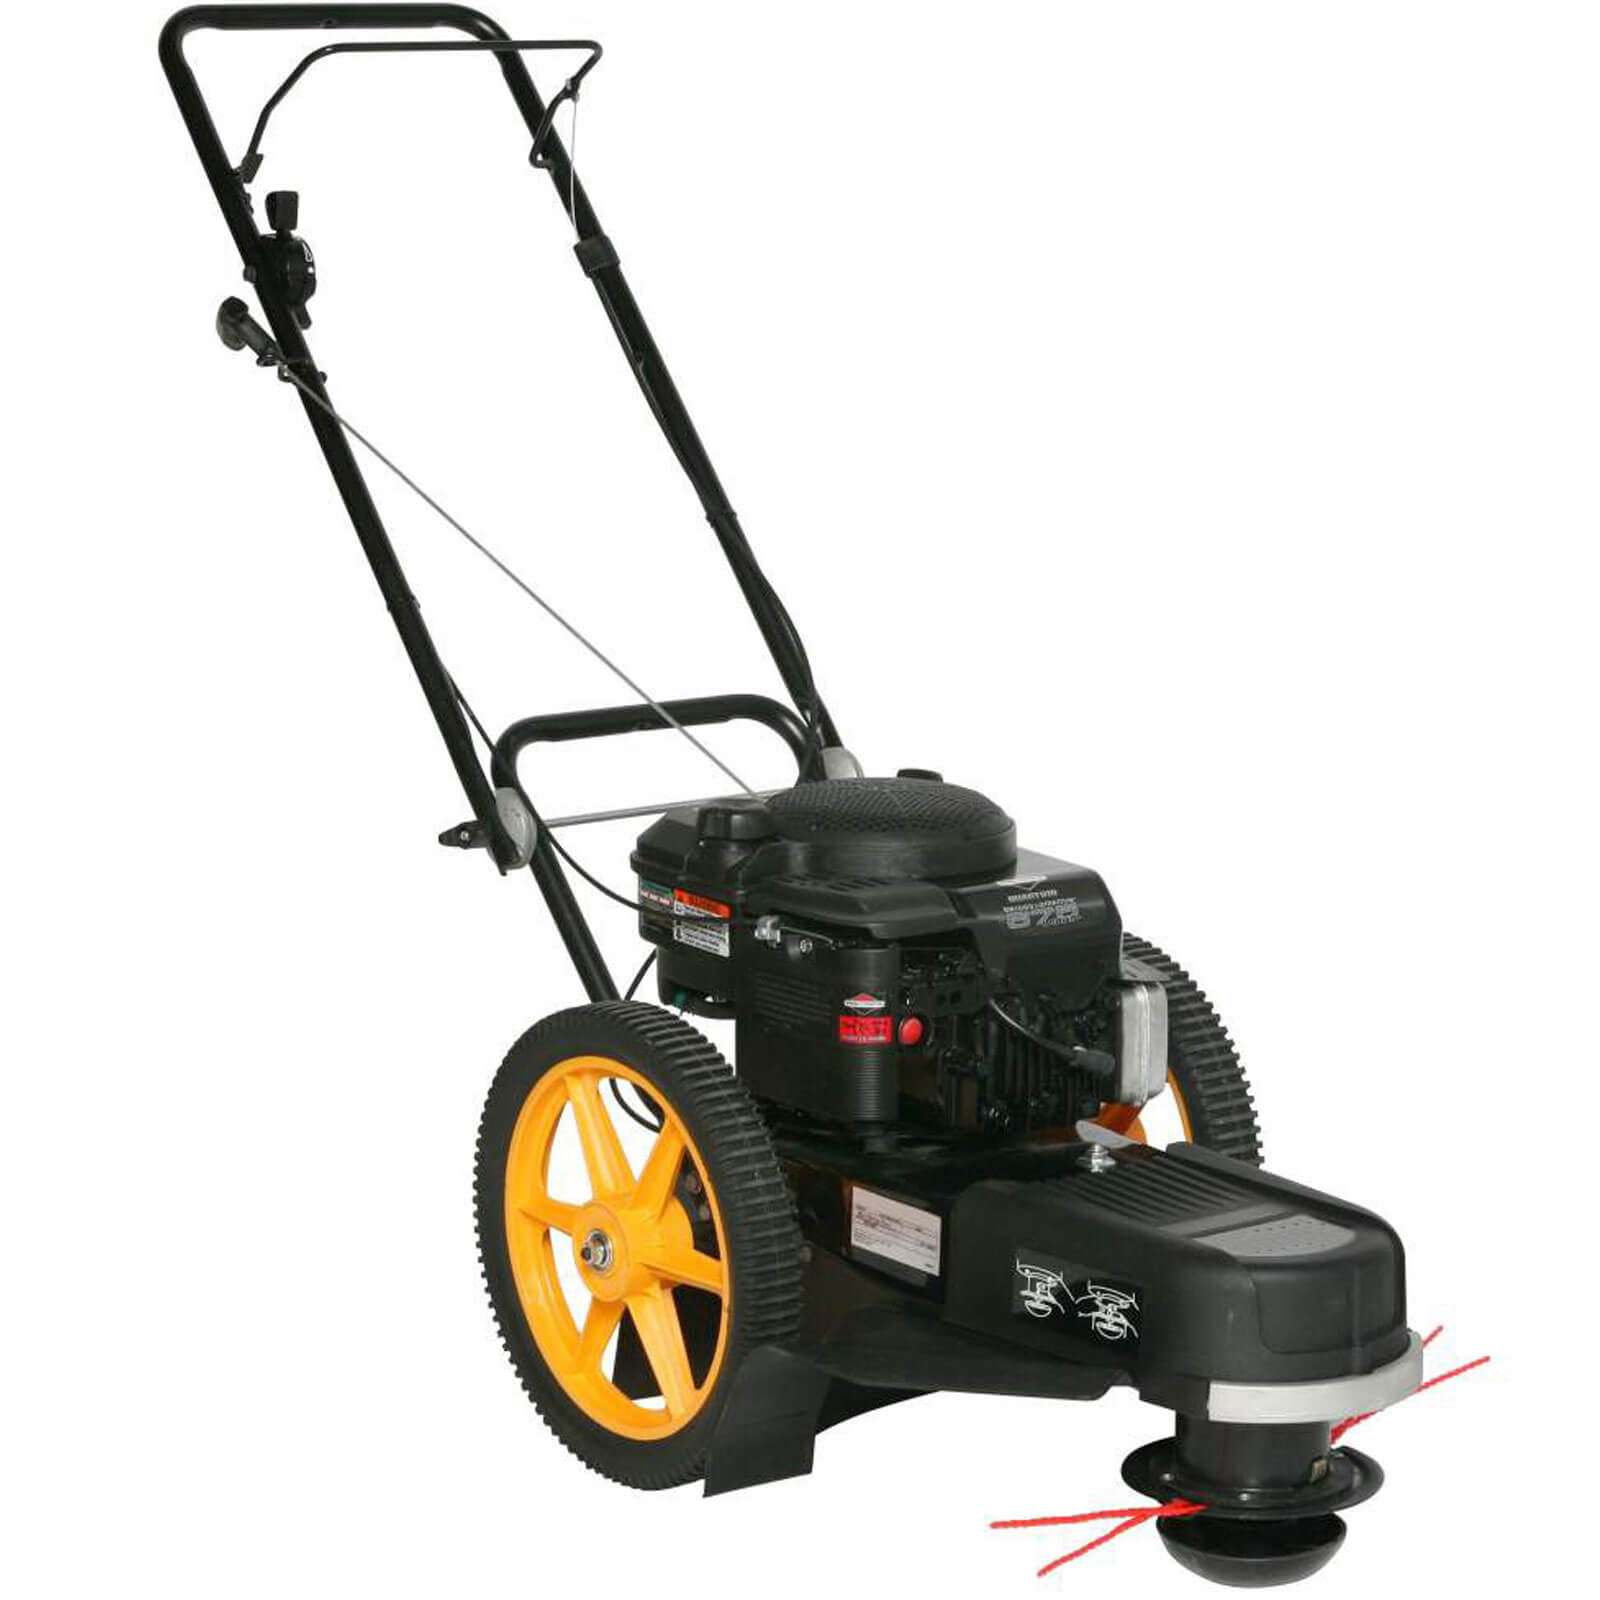 McCulloch MWT420 Wheeled Push Petrol Grass Trimmer 5100 Cut Width with Briggs & Stratton 625 Series Engine